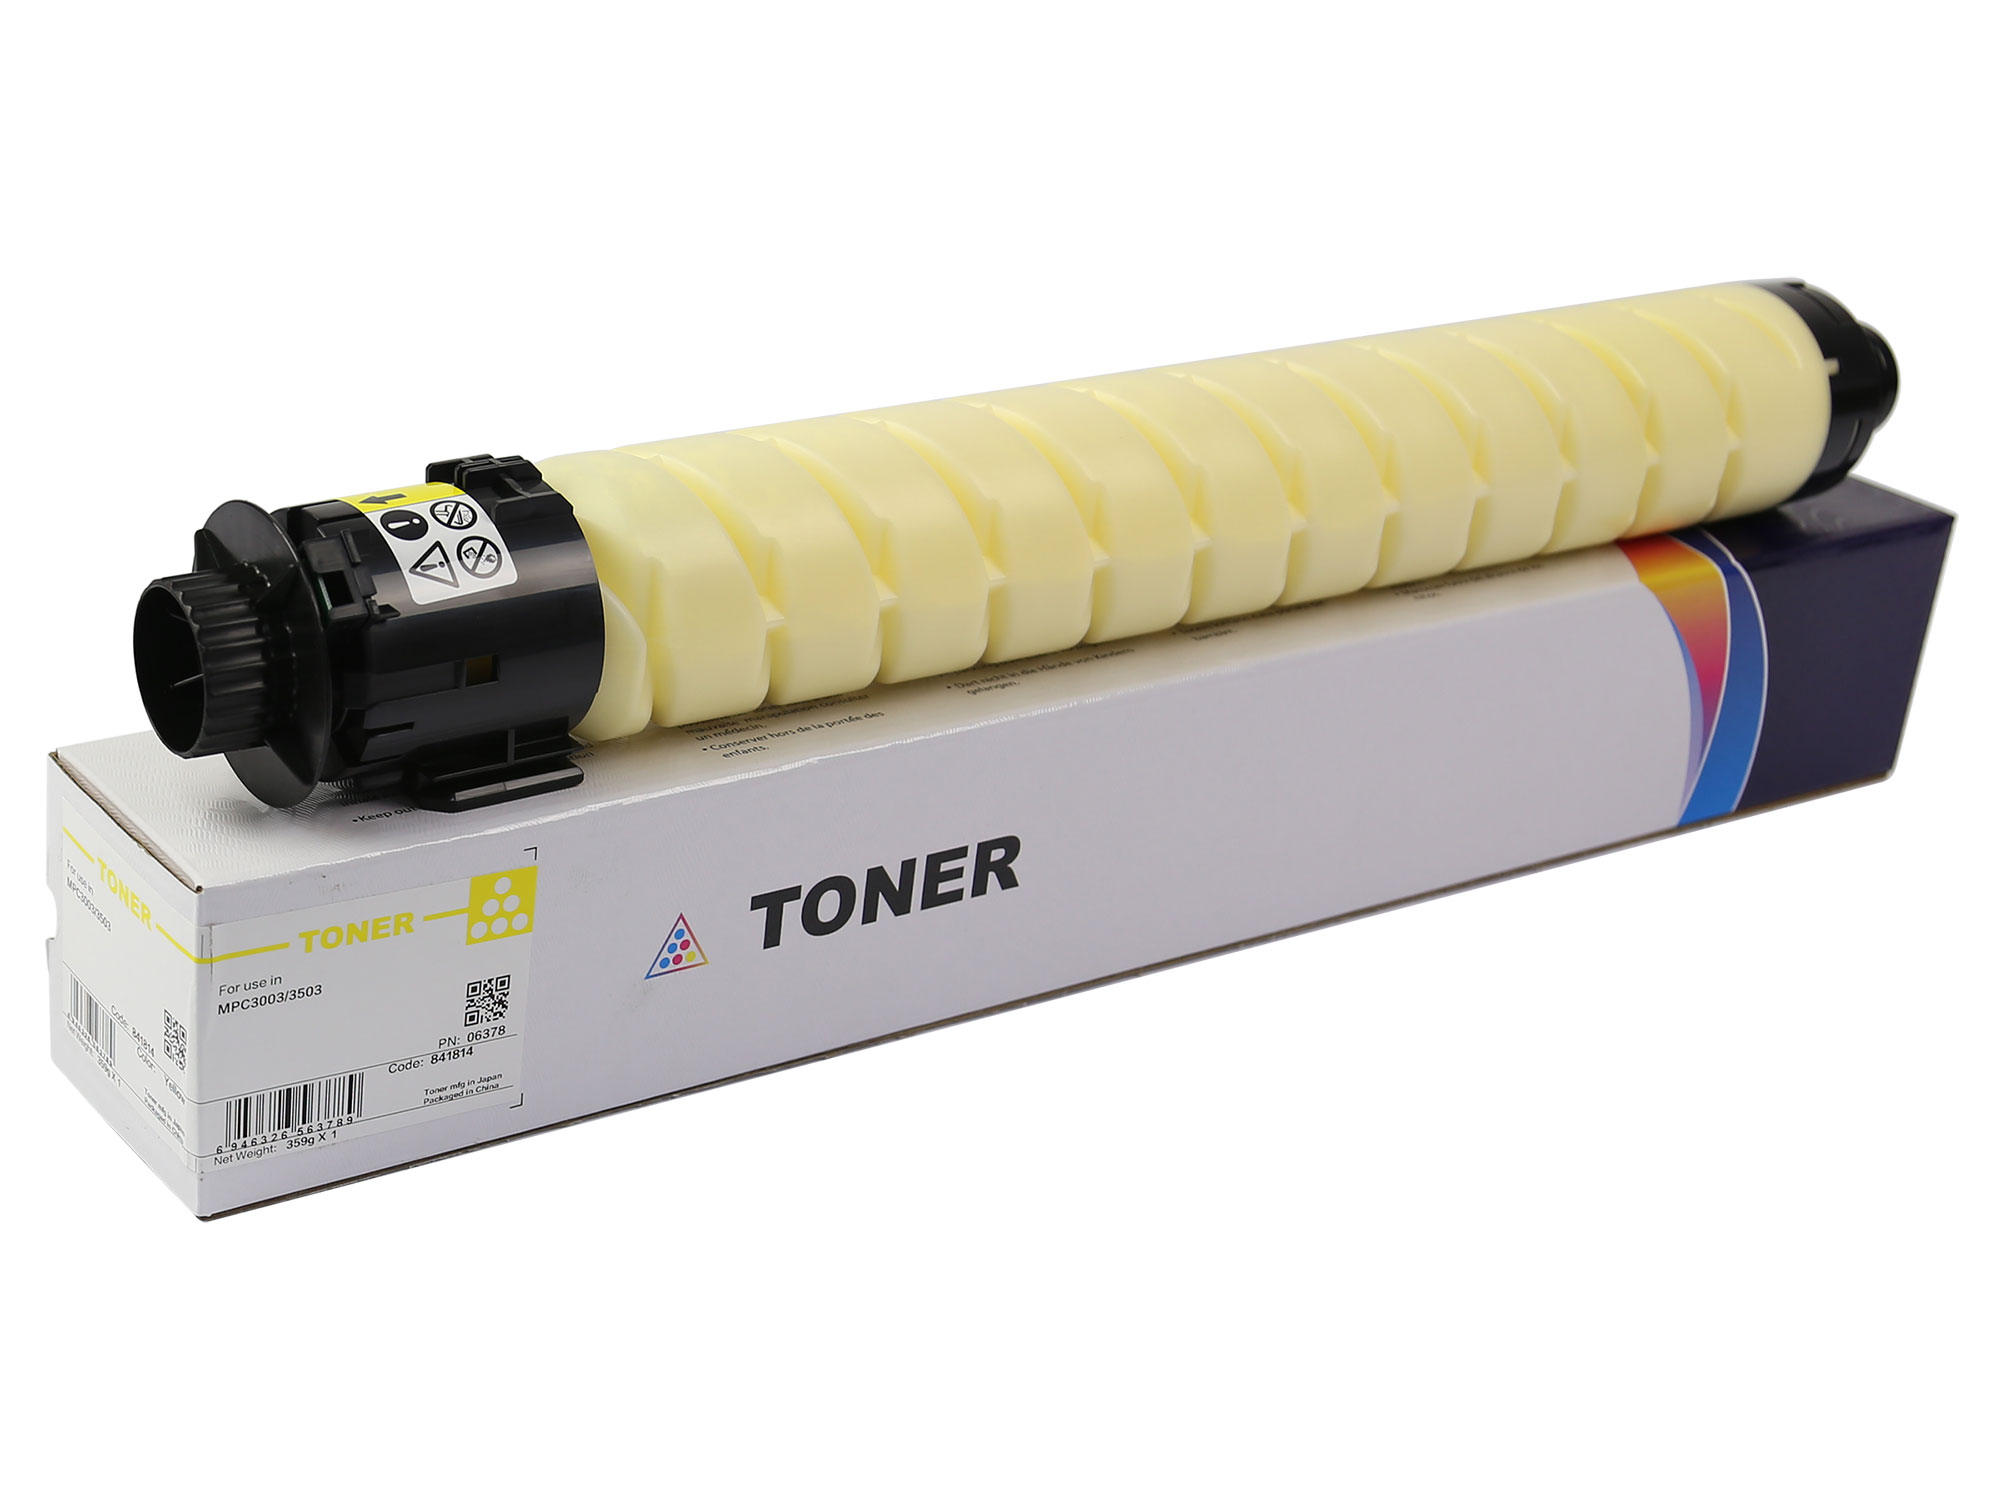 841814 841818 CPP Yellow Toner Cartridge for Ricoh MPC3003